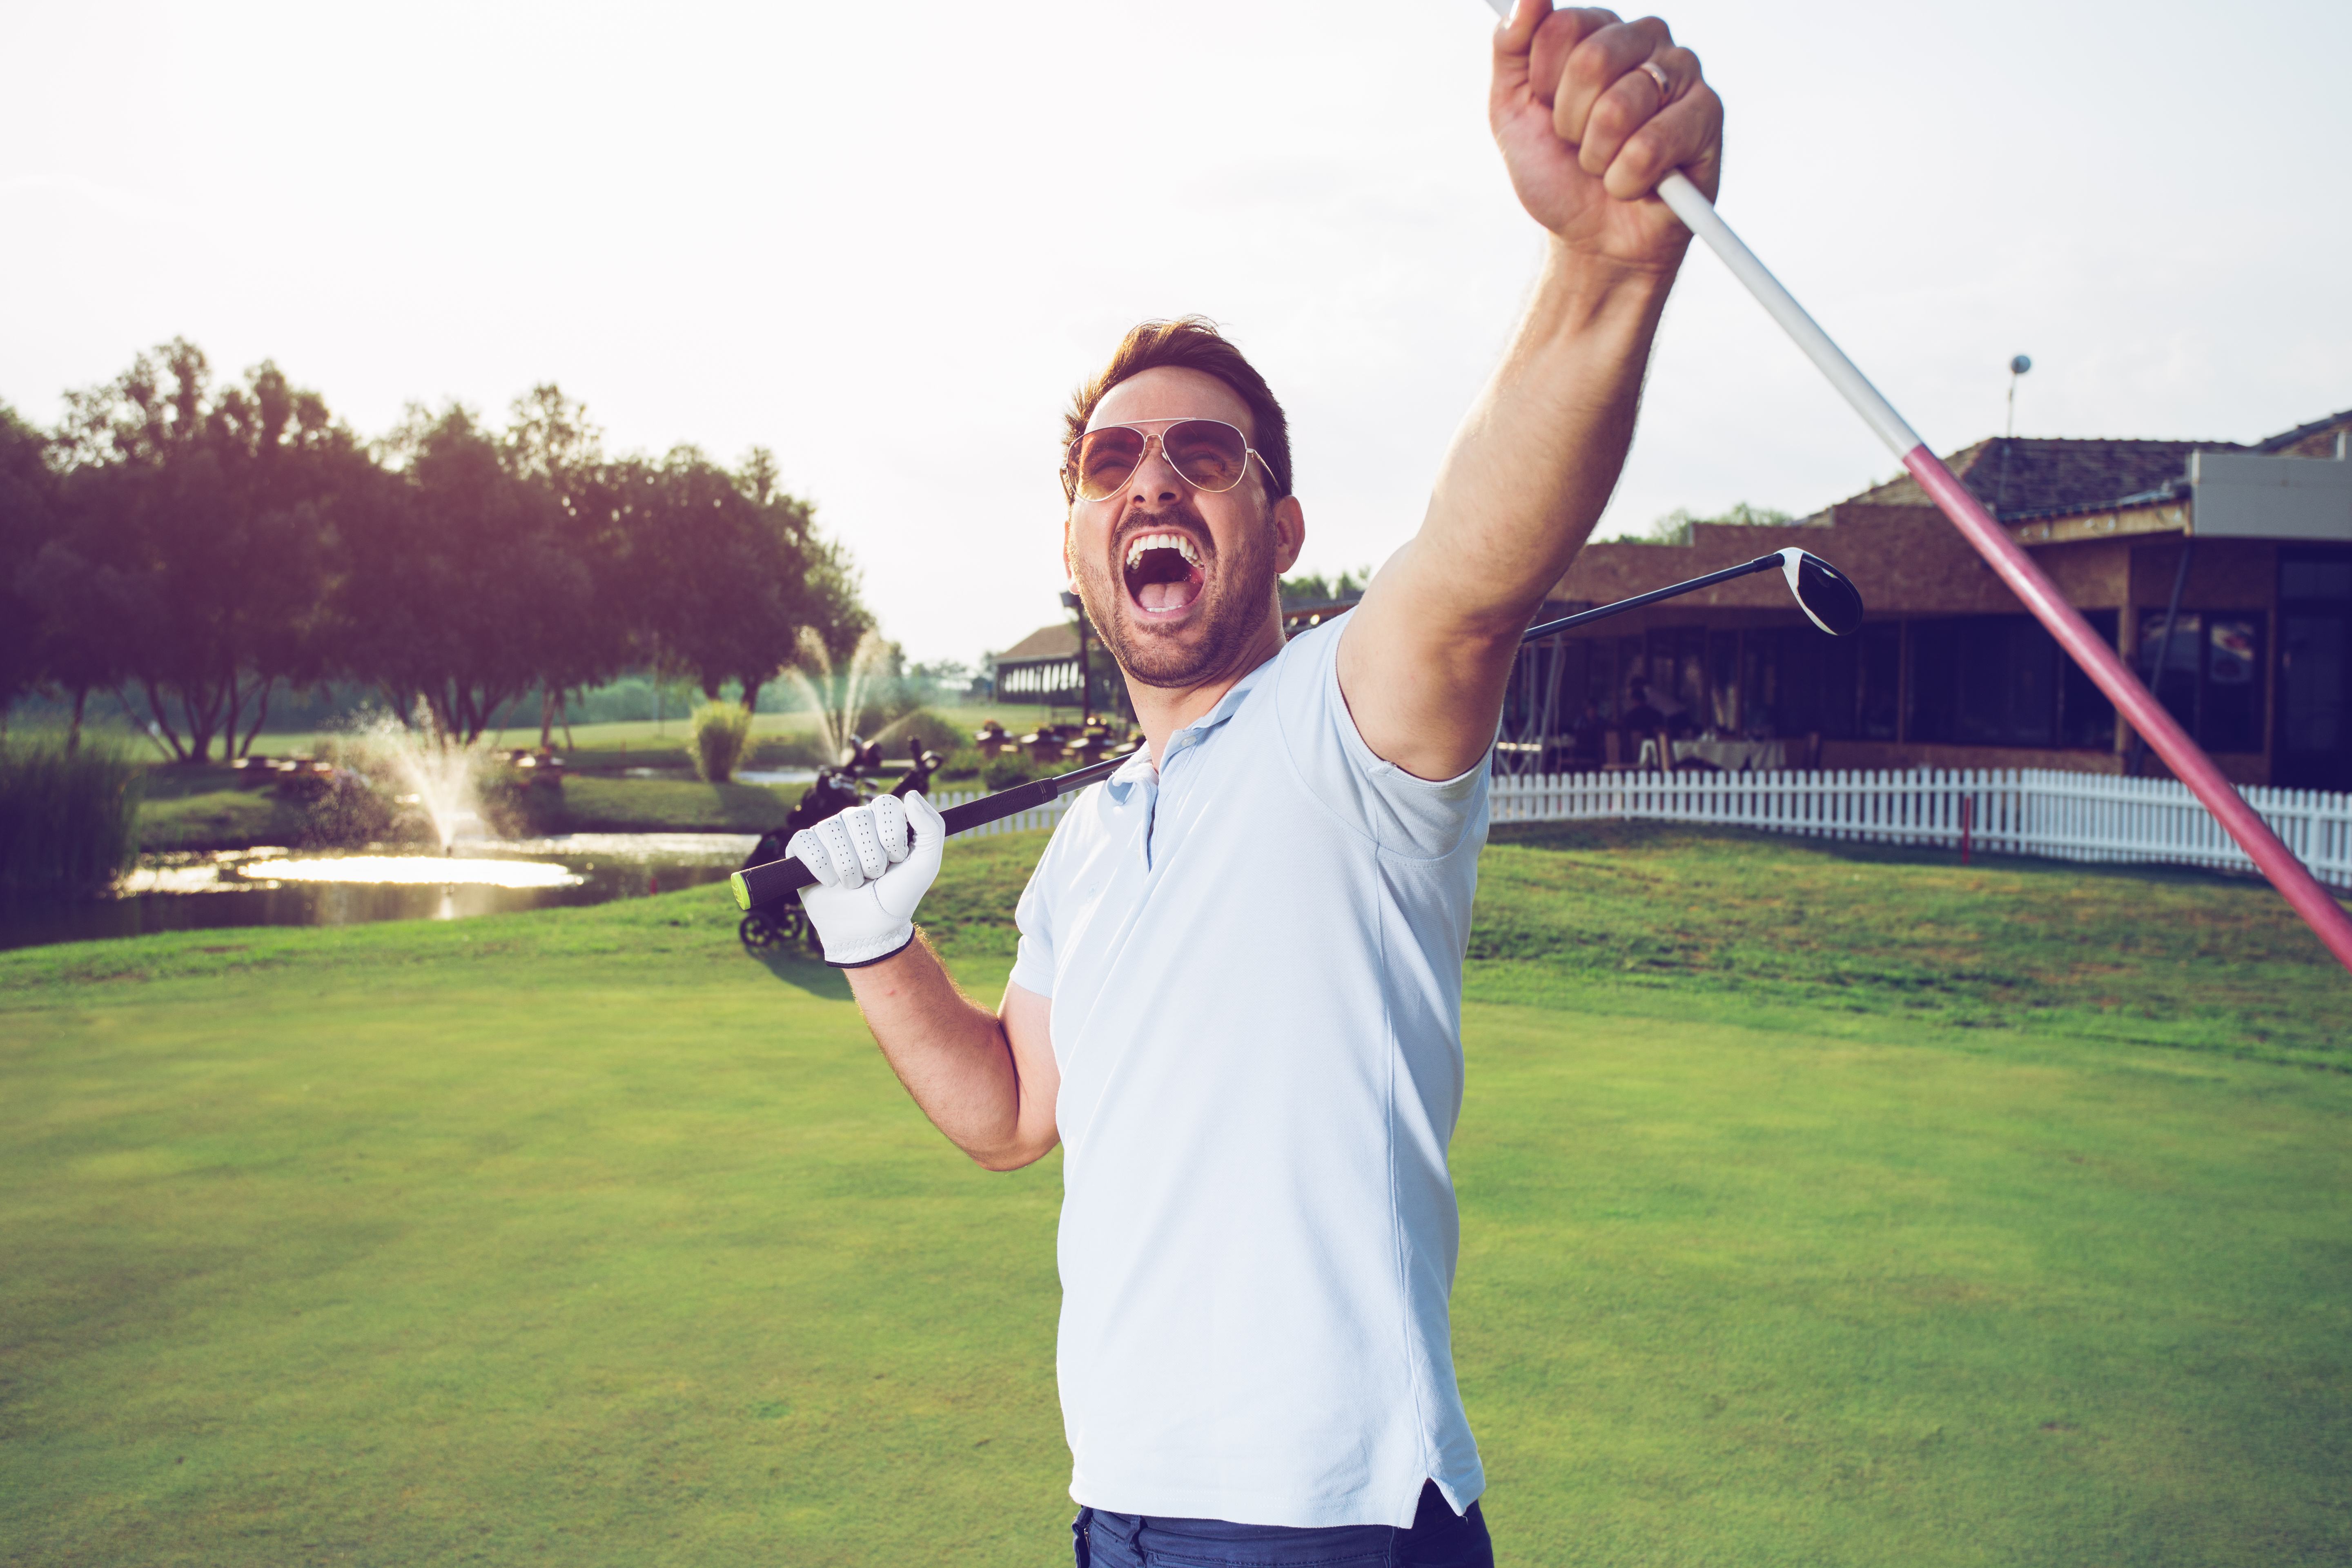 Building Up a Cannabis-Infused Golf Game